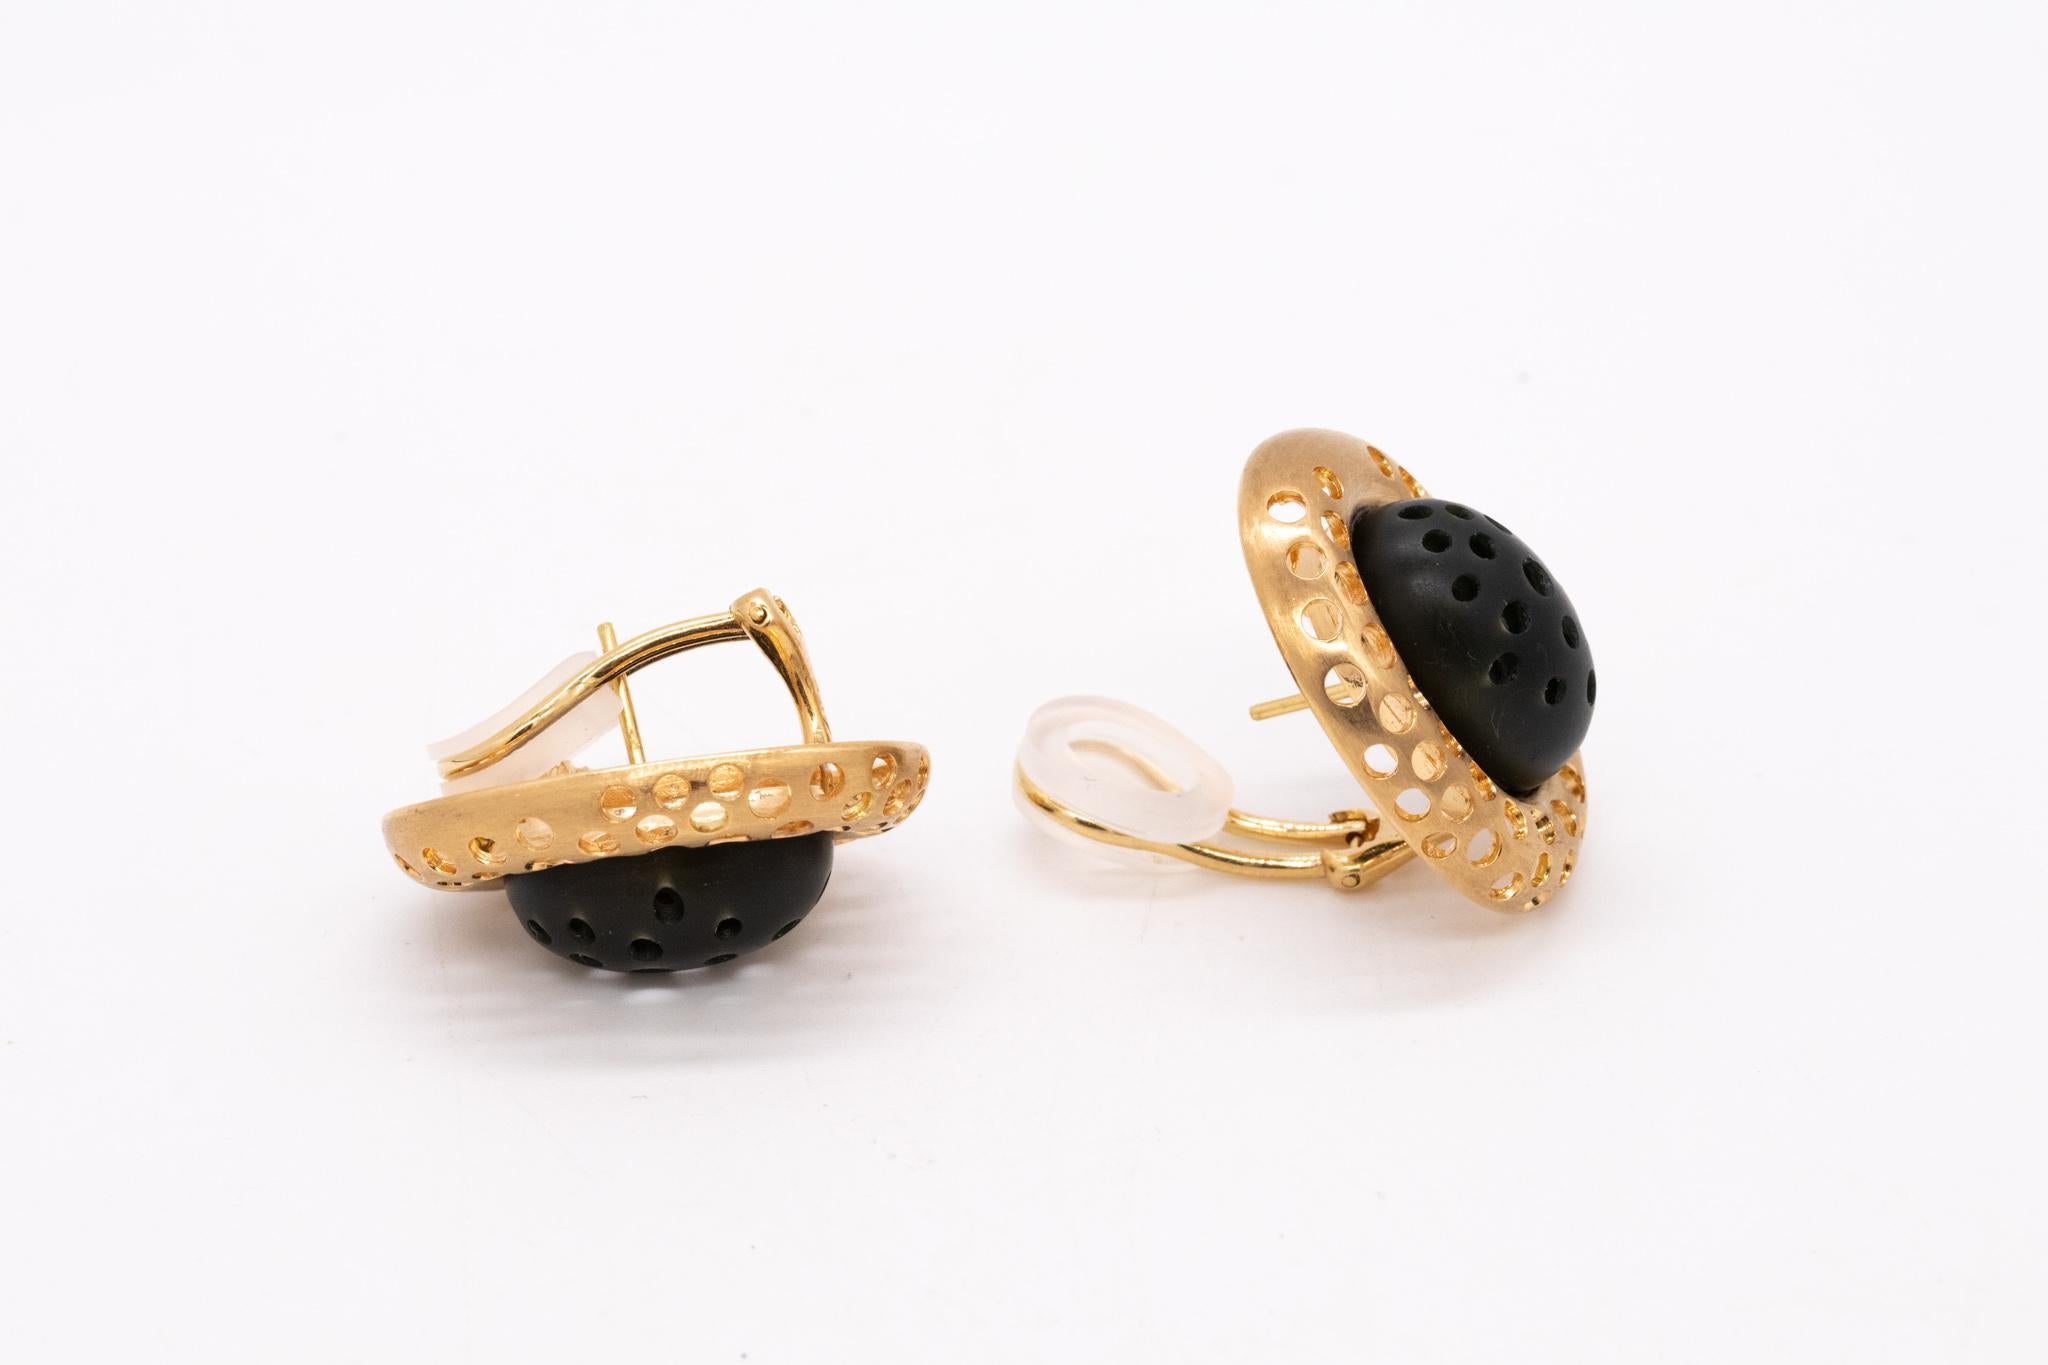 Modernist Angela Cummings Studios 1984 Clips Earrings in 18Kt Yellow Gold with Black Jade  For Sale